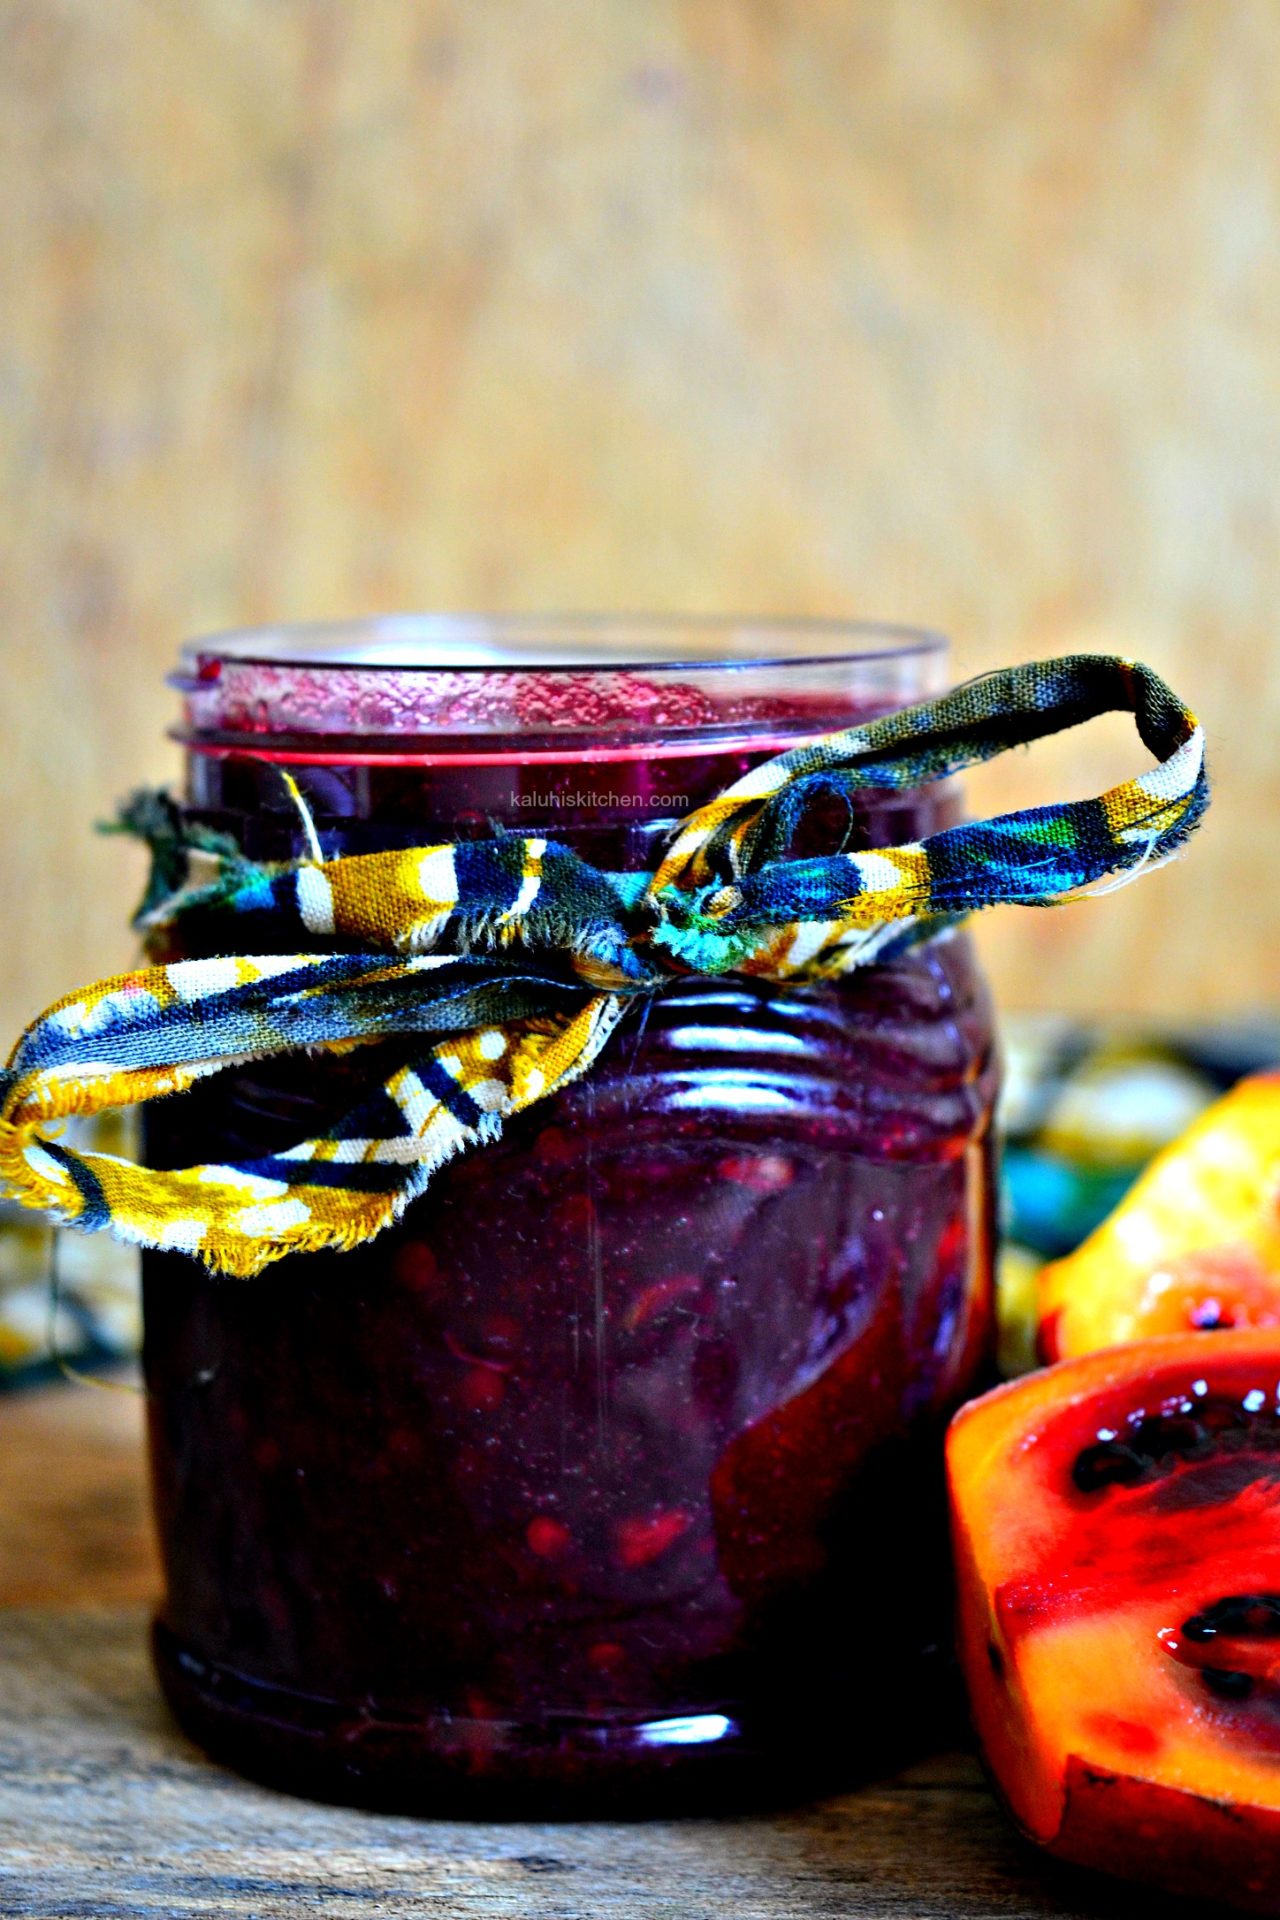 kenyan food blogs_african food bloggers_how to make jam_kenyan food_kenyan food_tree tomato_kaluhiskitchen.com